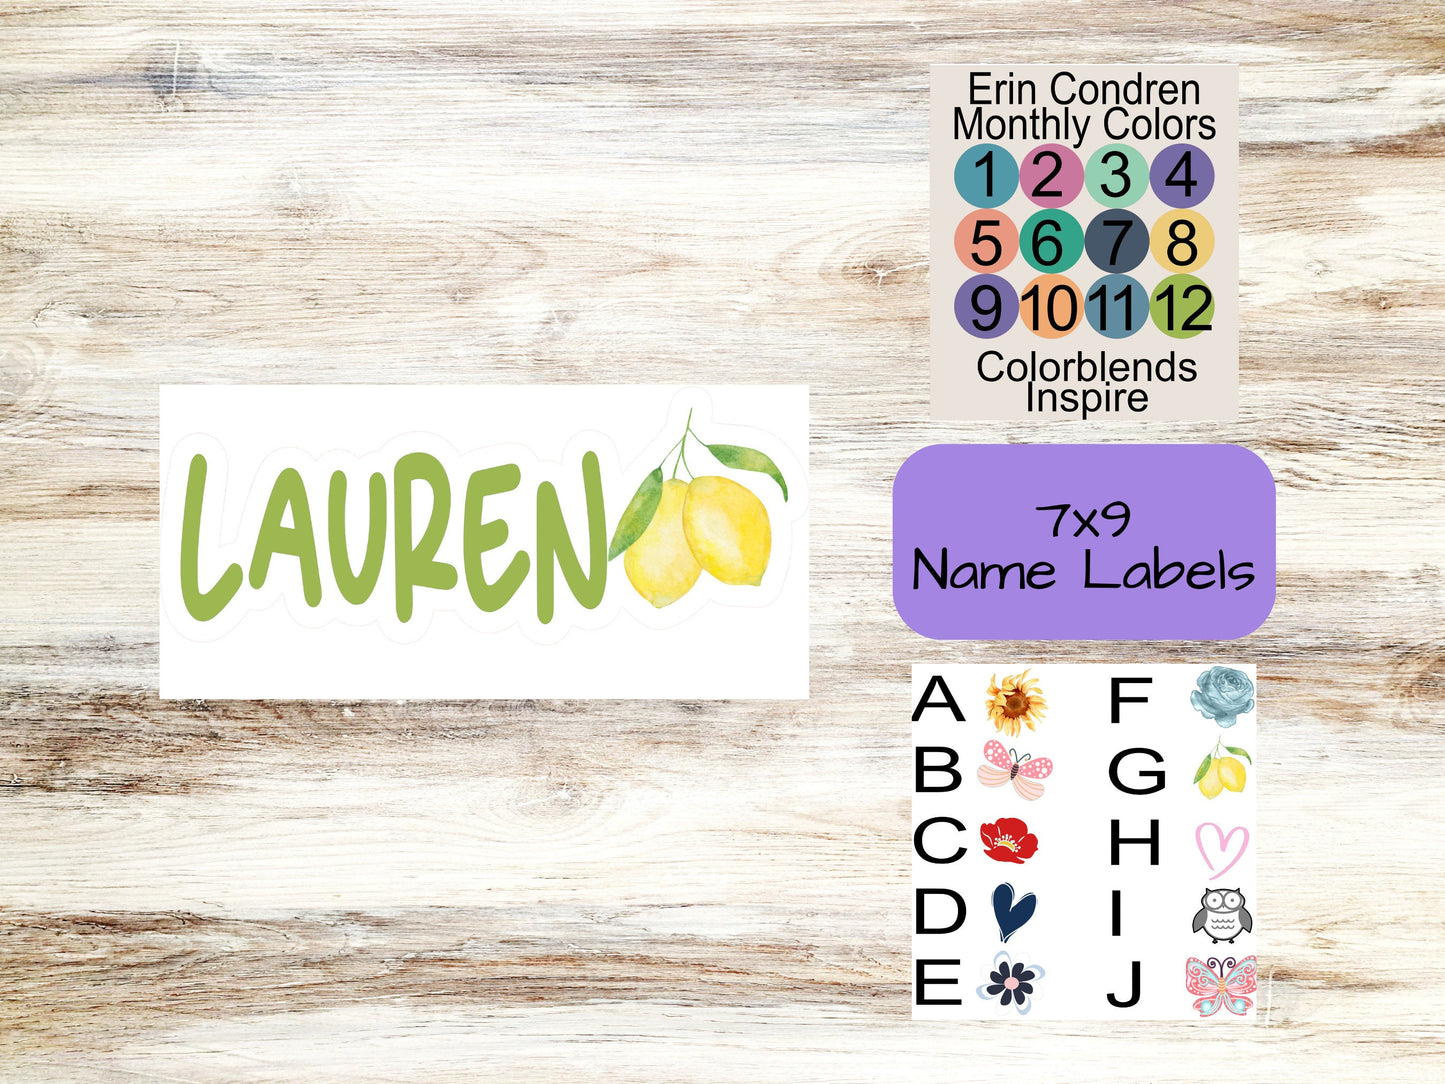 7x9 Inspire Daily Name Label || Name Decal for INSPIRE || Planner Decals || Planner Name Decals